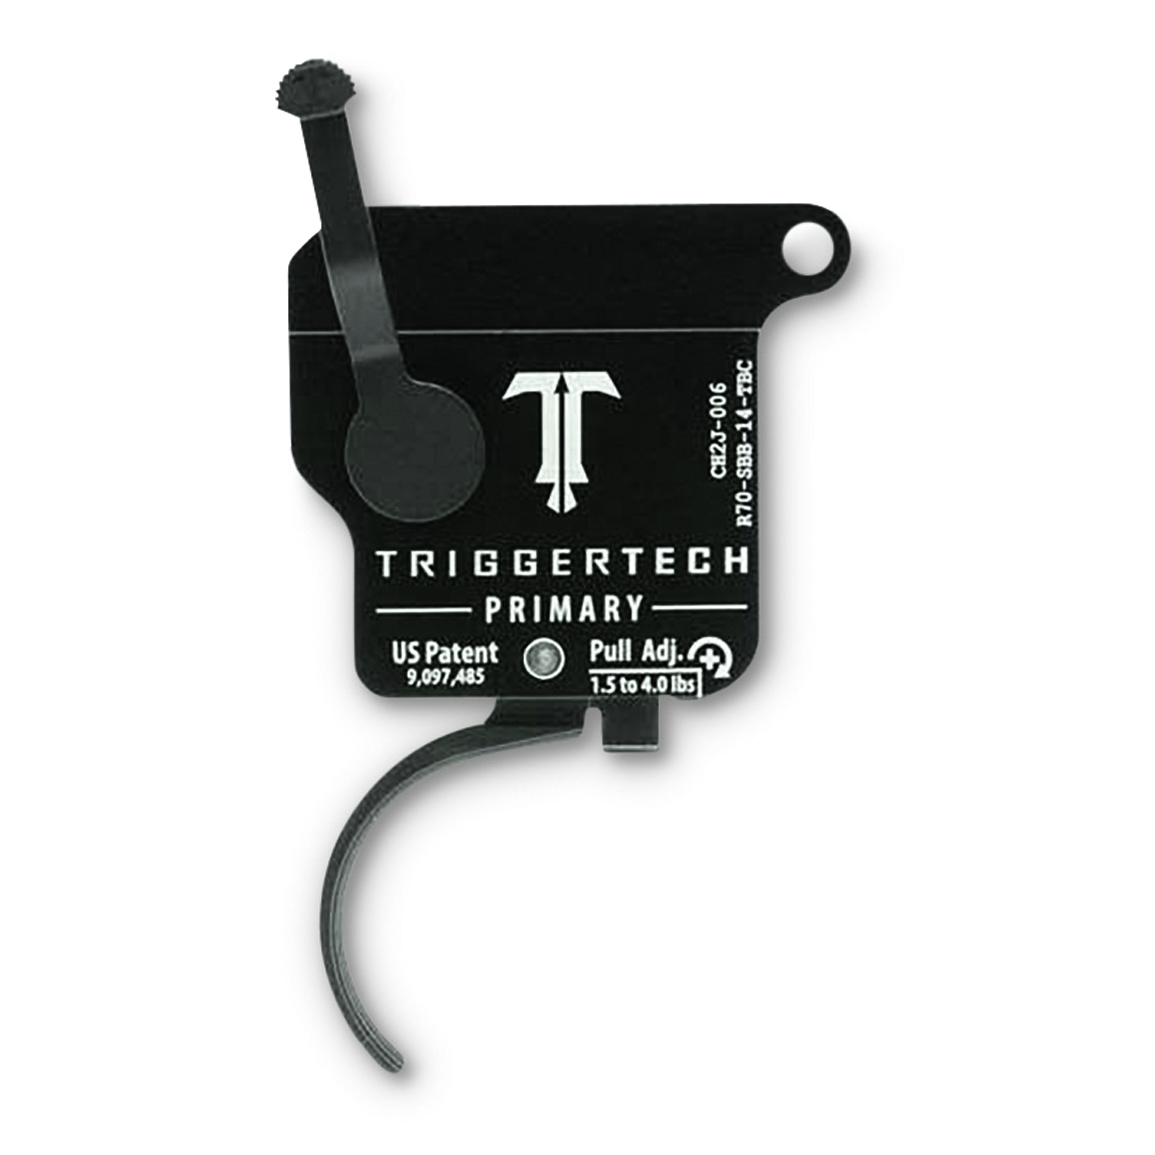 TriggerTech Remington 700 Primary Single-Stage Black Curved Trigger, Right Hand, w/Bolt Release